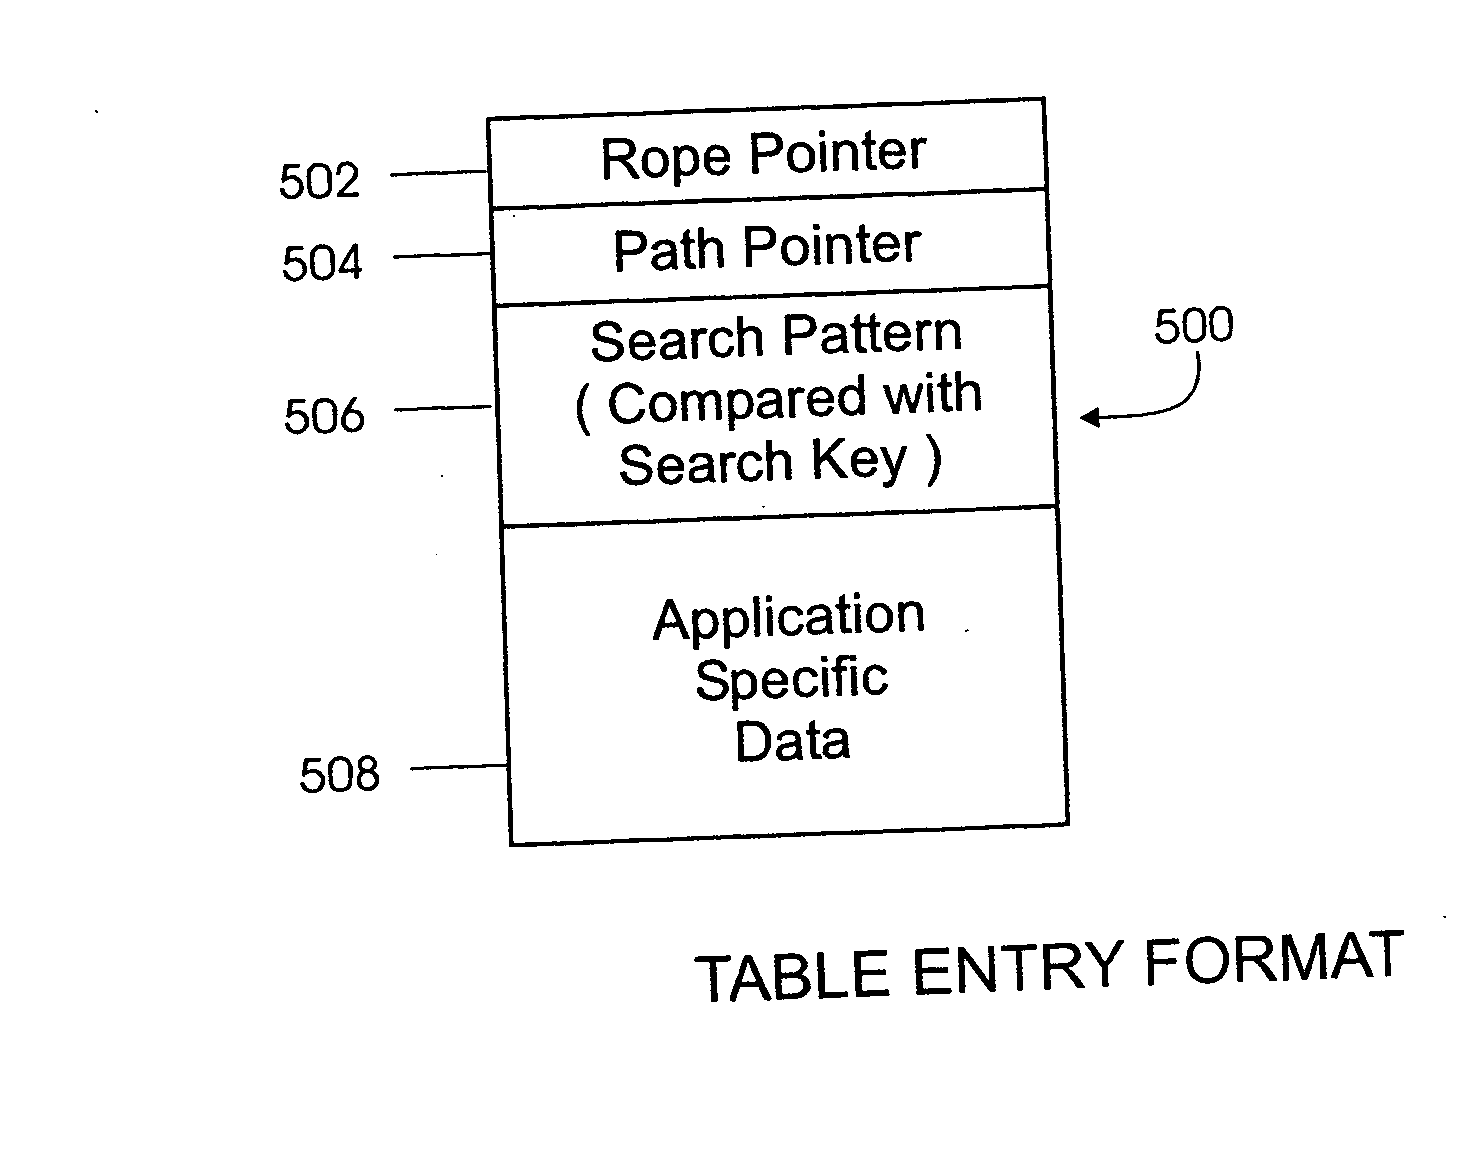 Data structure supporting random delete and aging/timer function